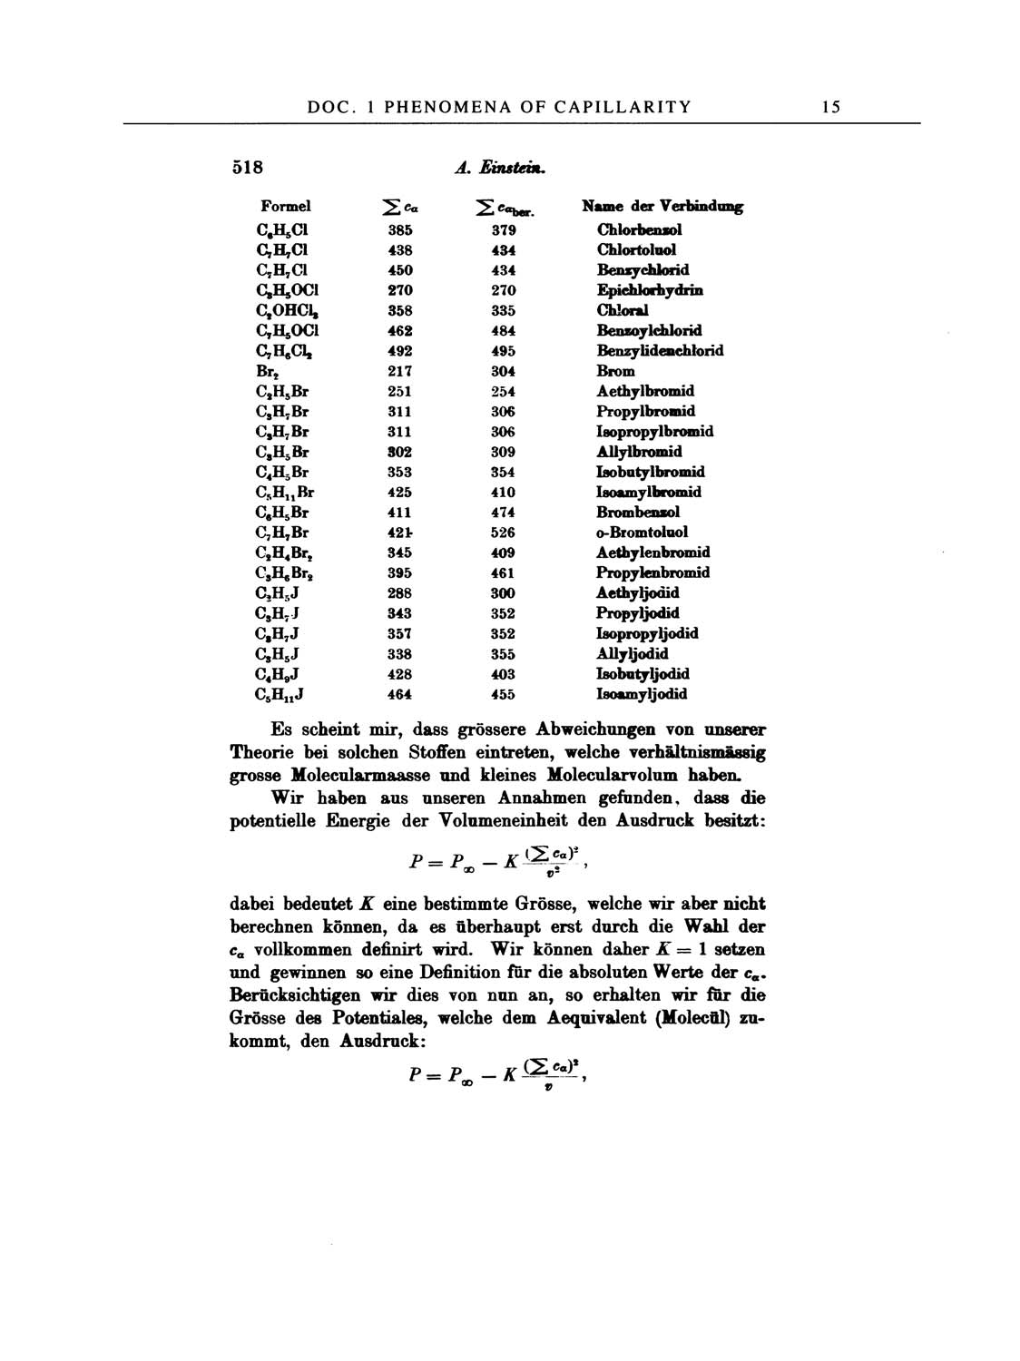 Volume 2: The Swiss Years: Writings, 1900-1909 page 15